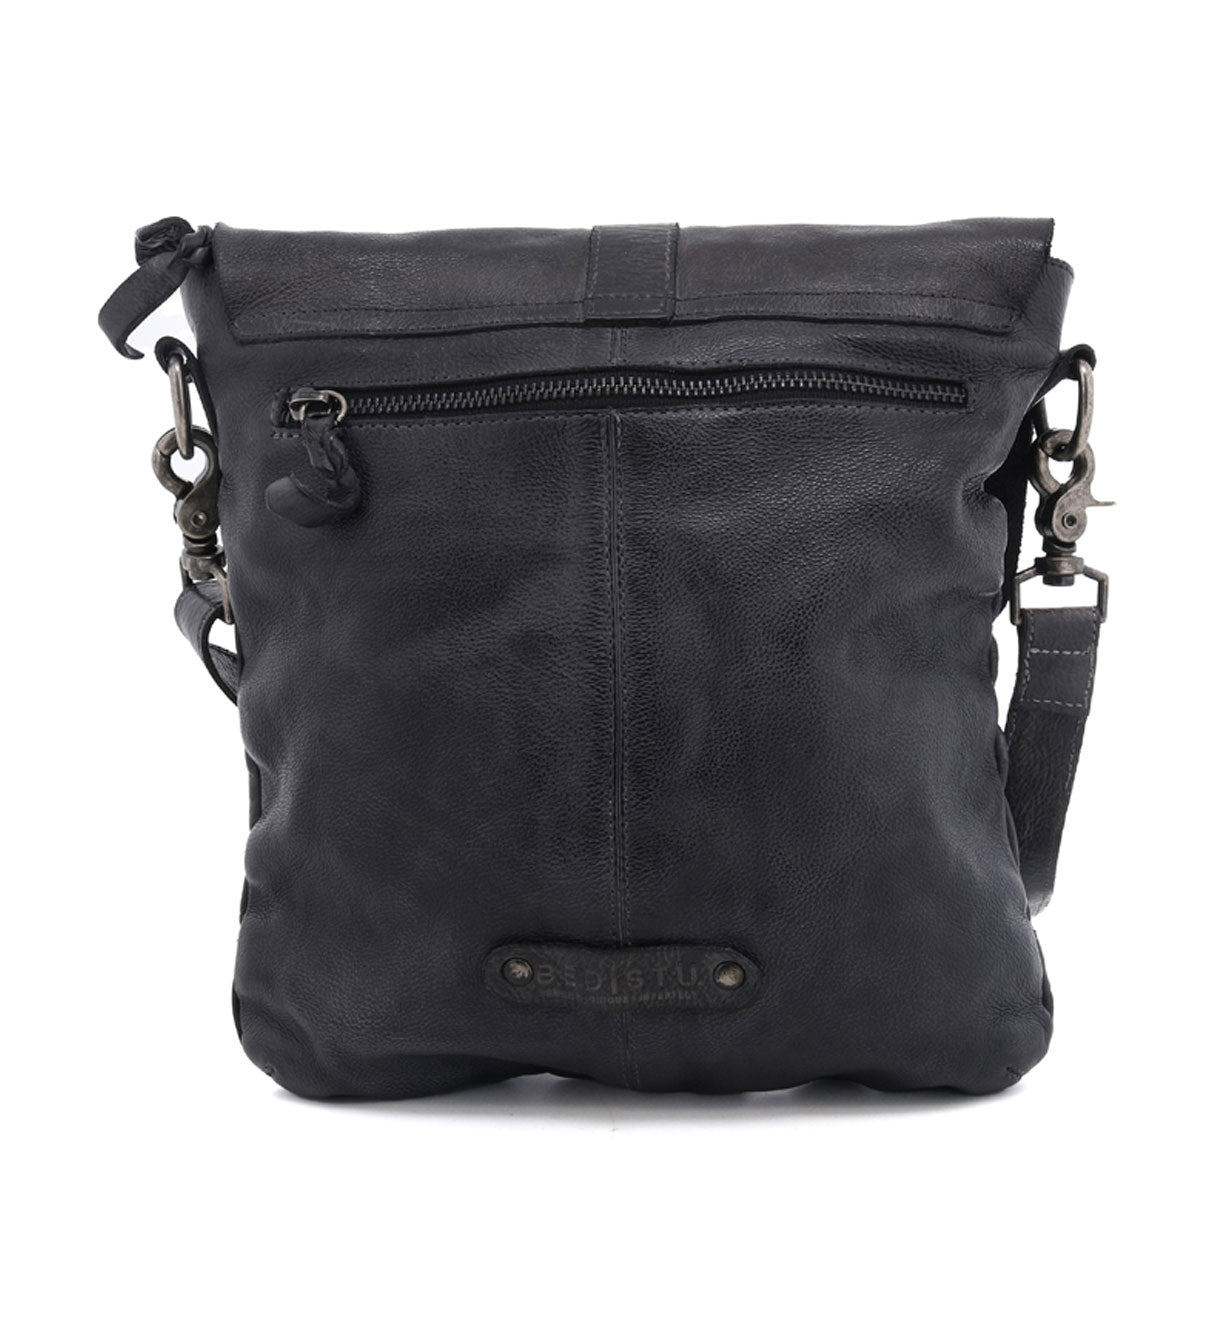 A black leather crossbody bag with an adjustable strap, called the Jack by Bed Stu.